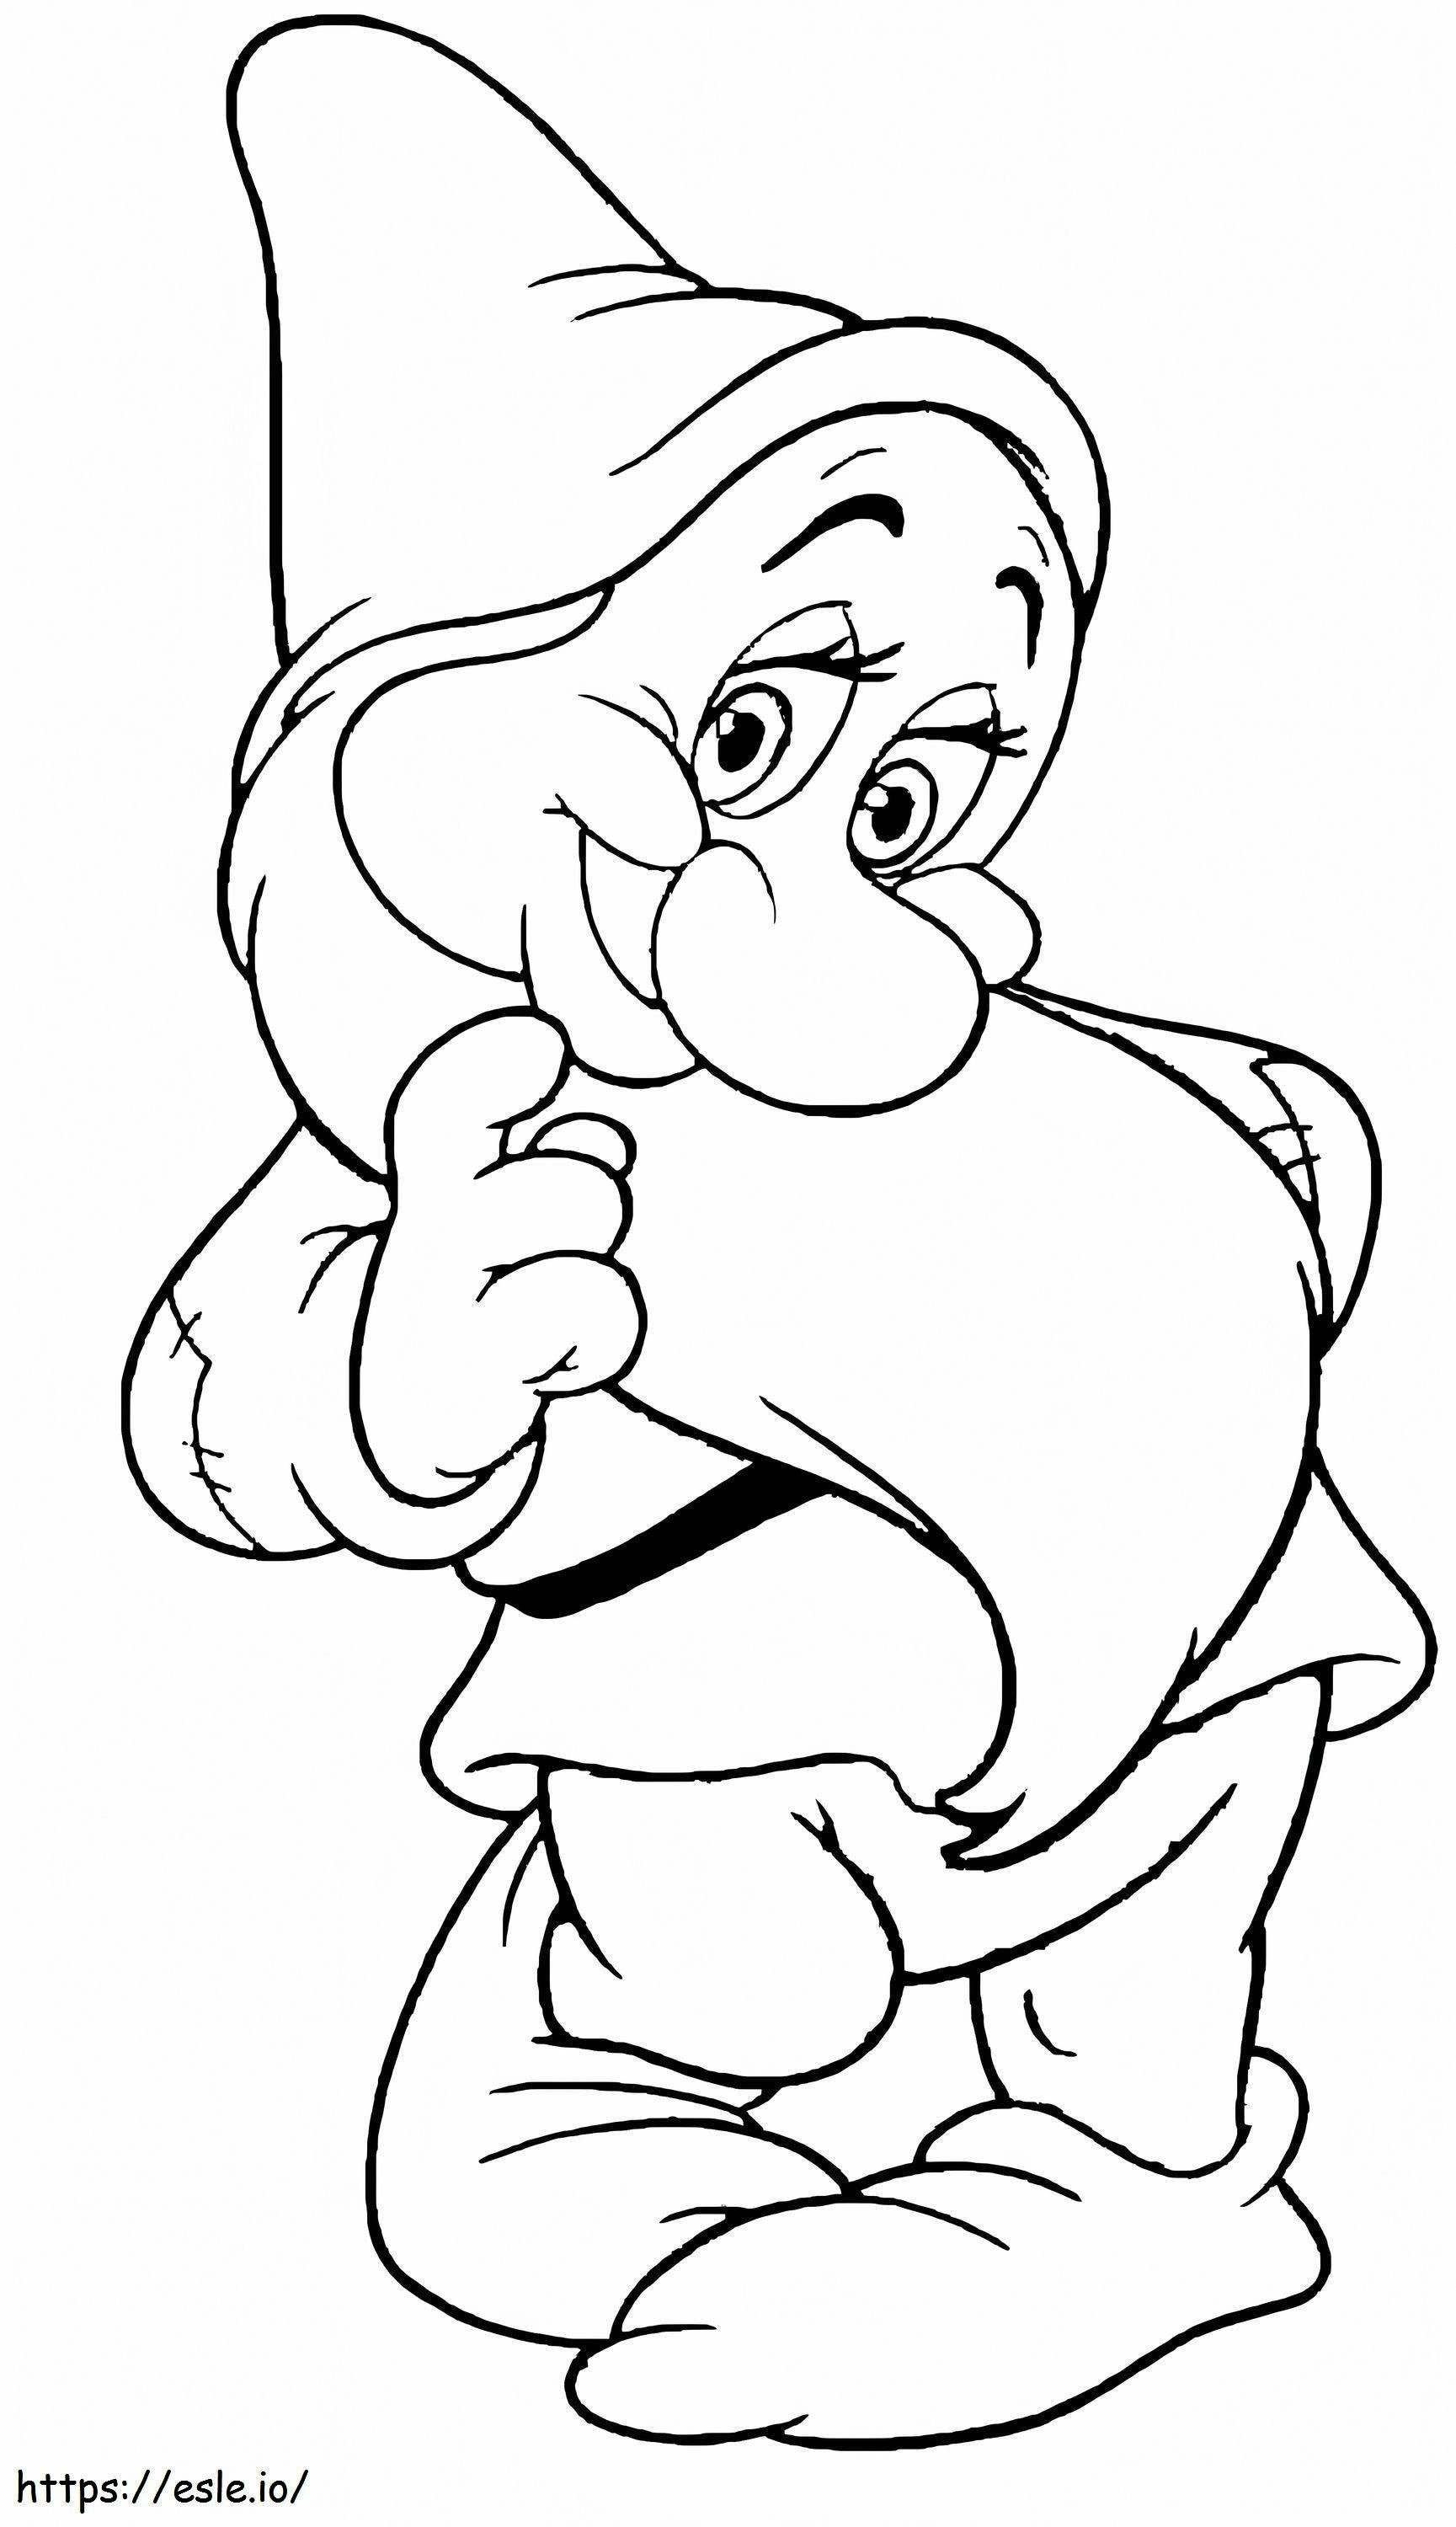 Dwaf Smiling coloring page